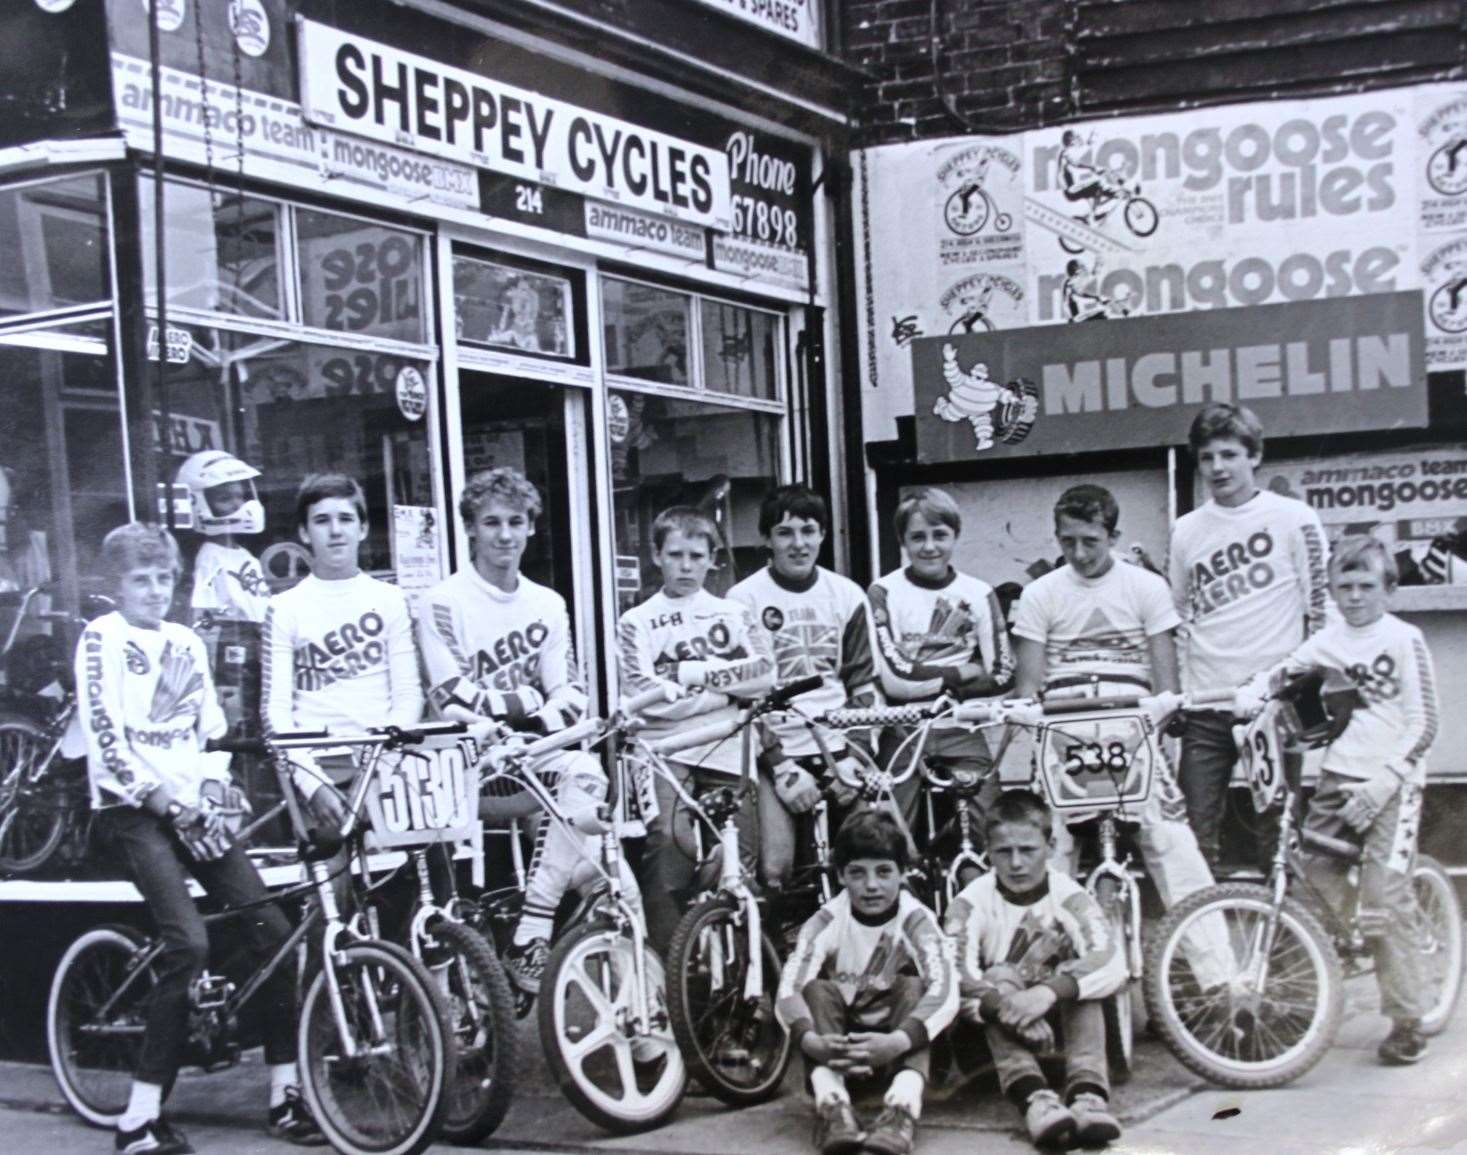 Sheppey Cycles' heyday in the 1980s when it had its own BMX team